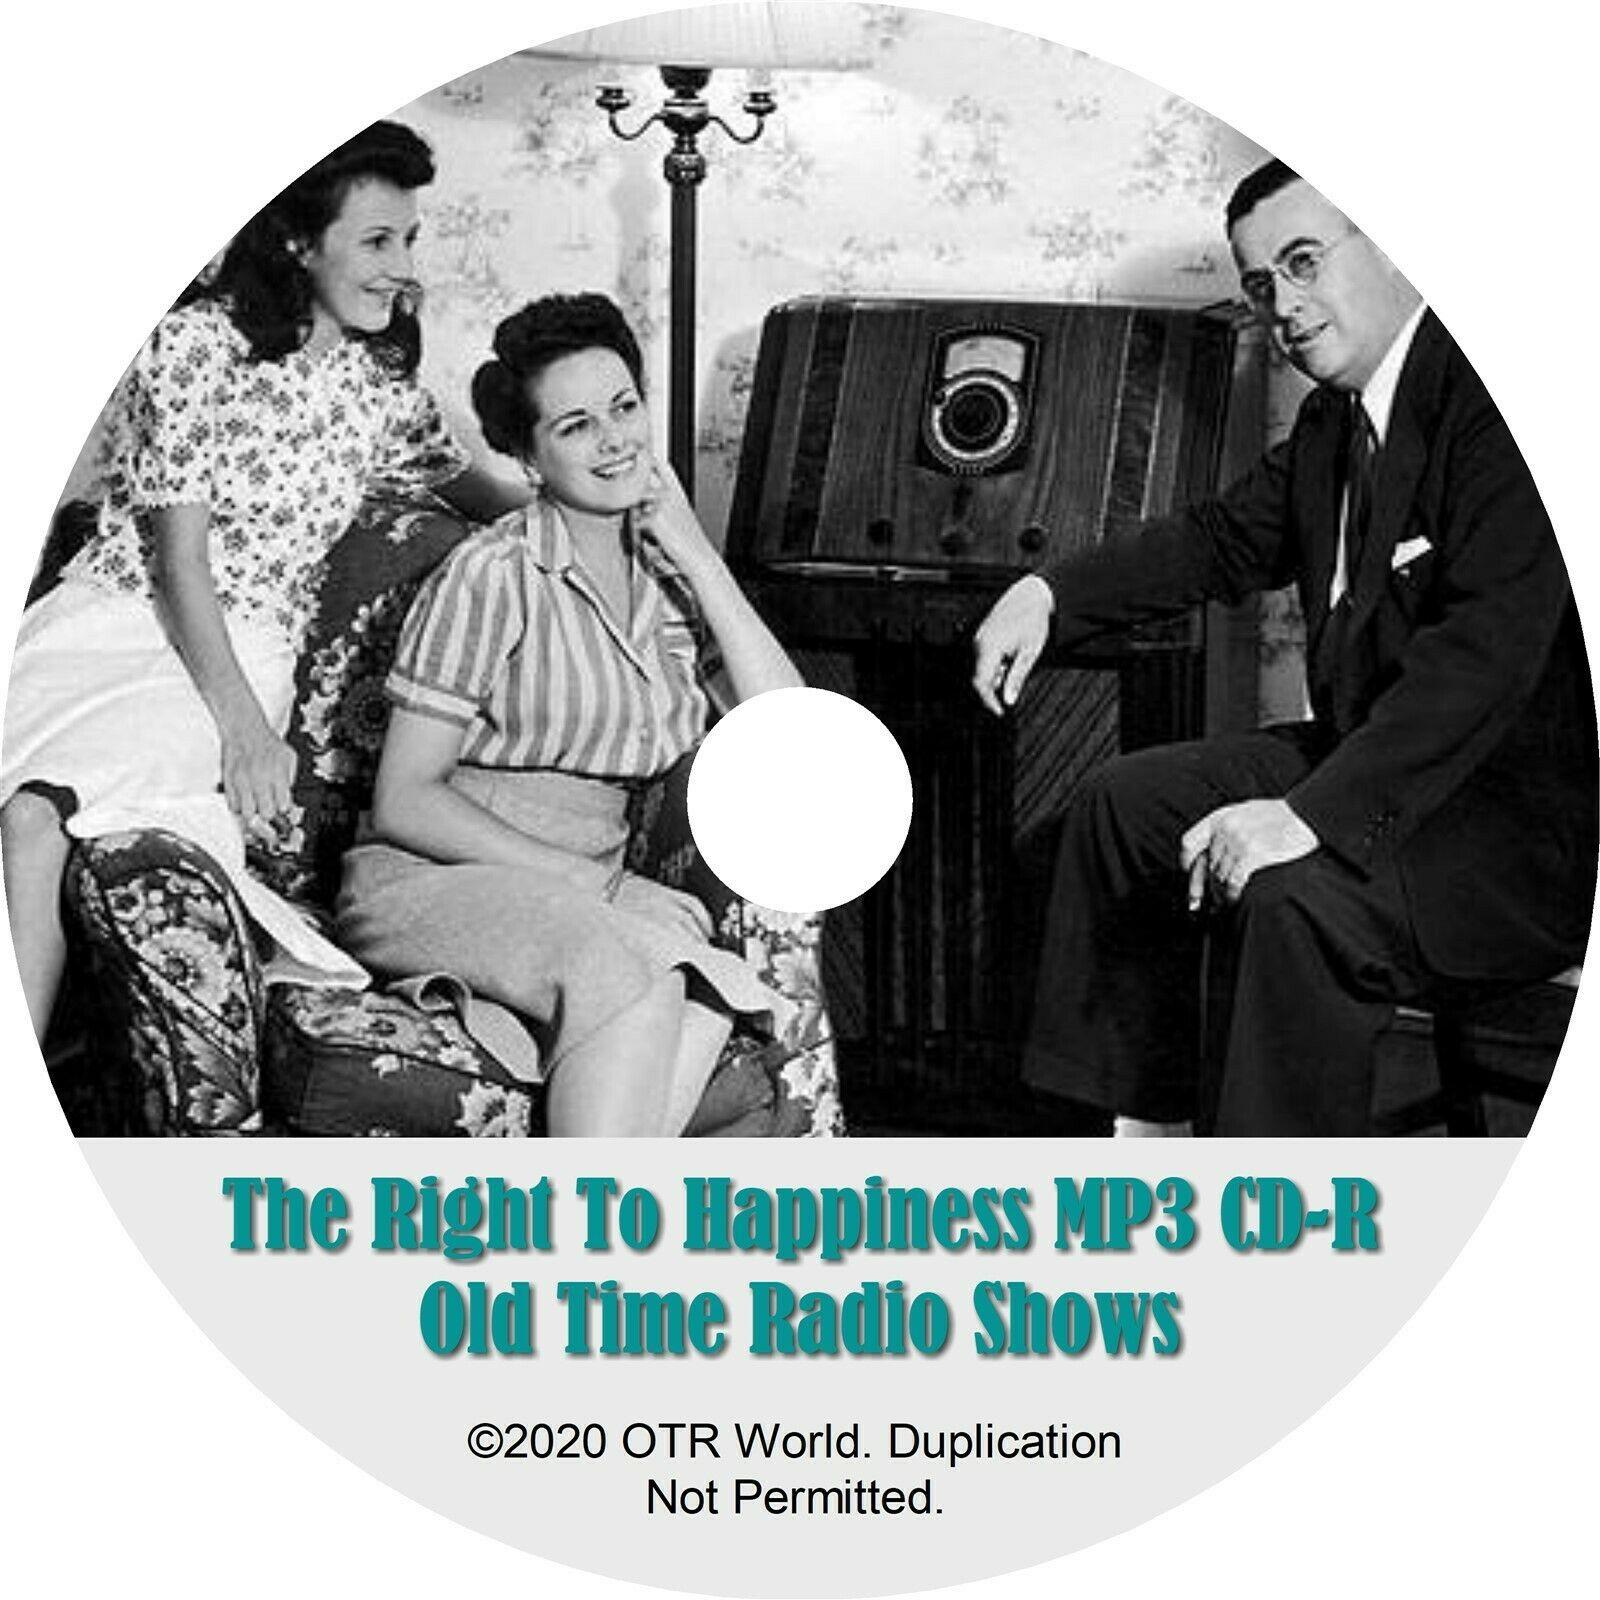 The Right To Happiness OTR Old Time Radio Shows MP3 On CD-R 9 Episodes